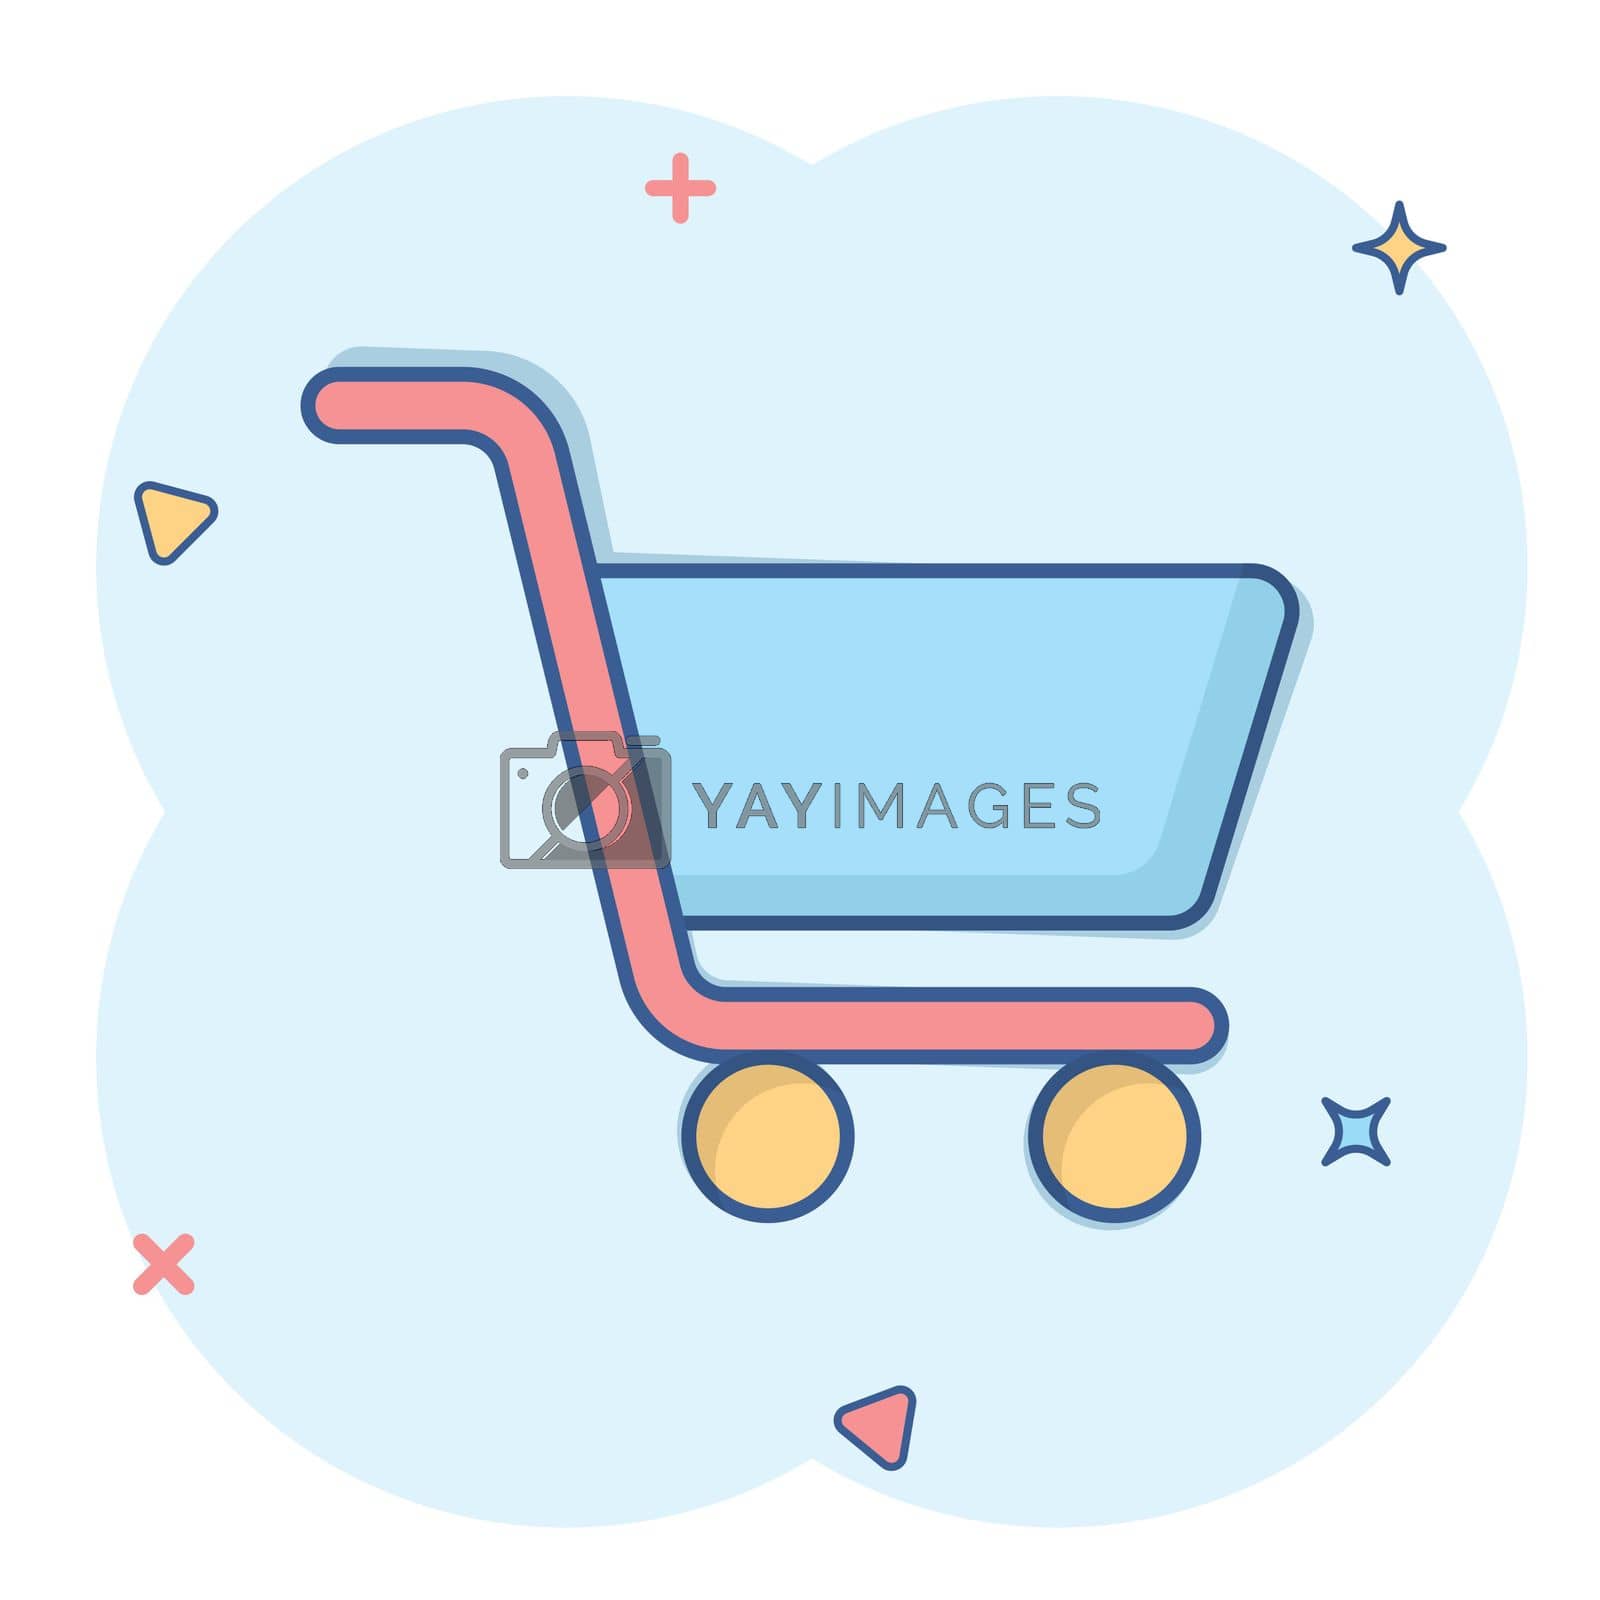 Royalty free image of Shopping cart icon in comic style. Trolley cartoon vector illustration on white isolated background. Basket splash effect business concept. by LysenkoA